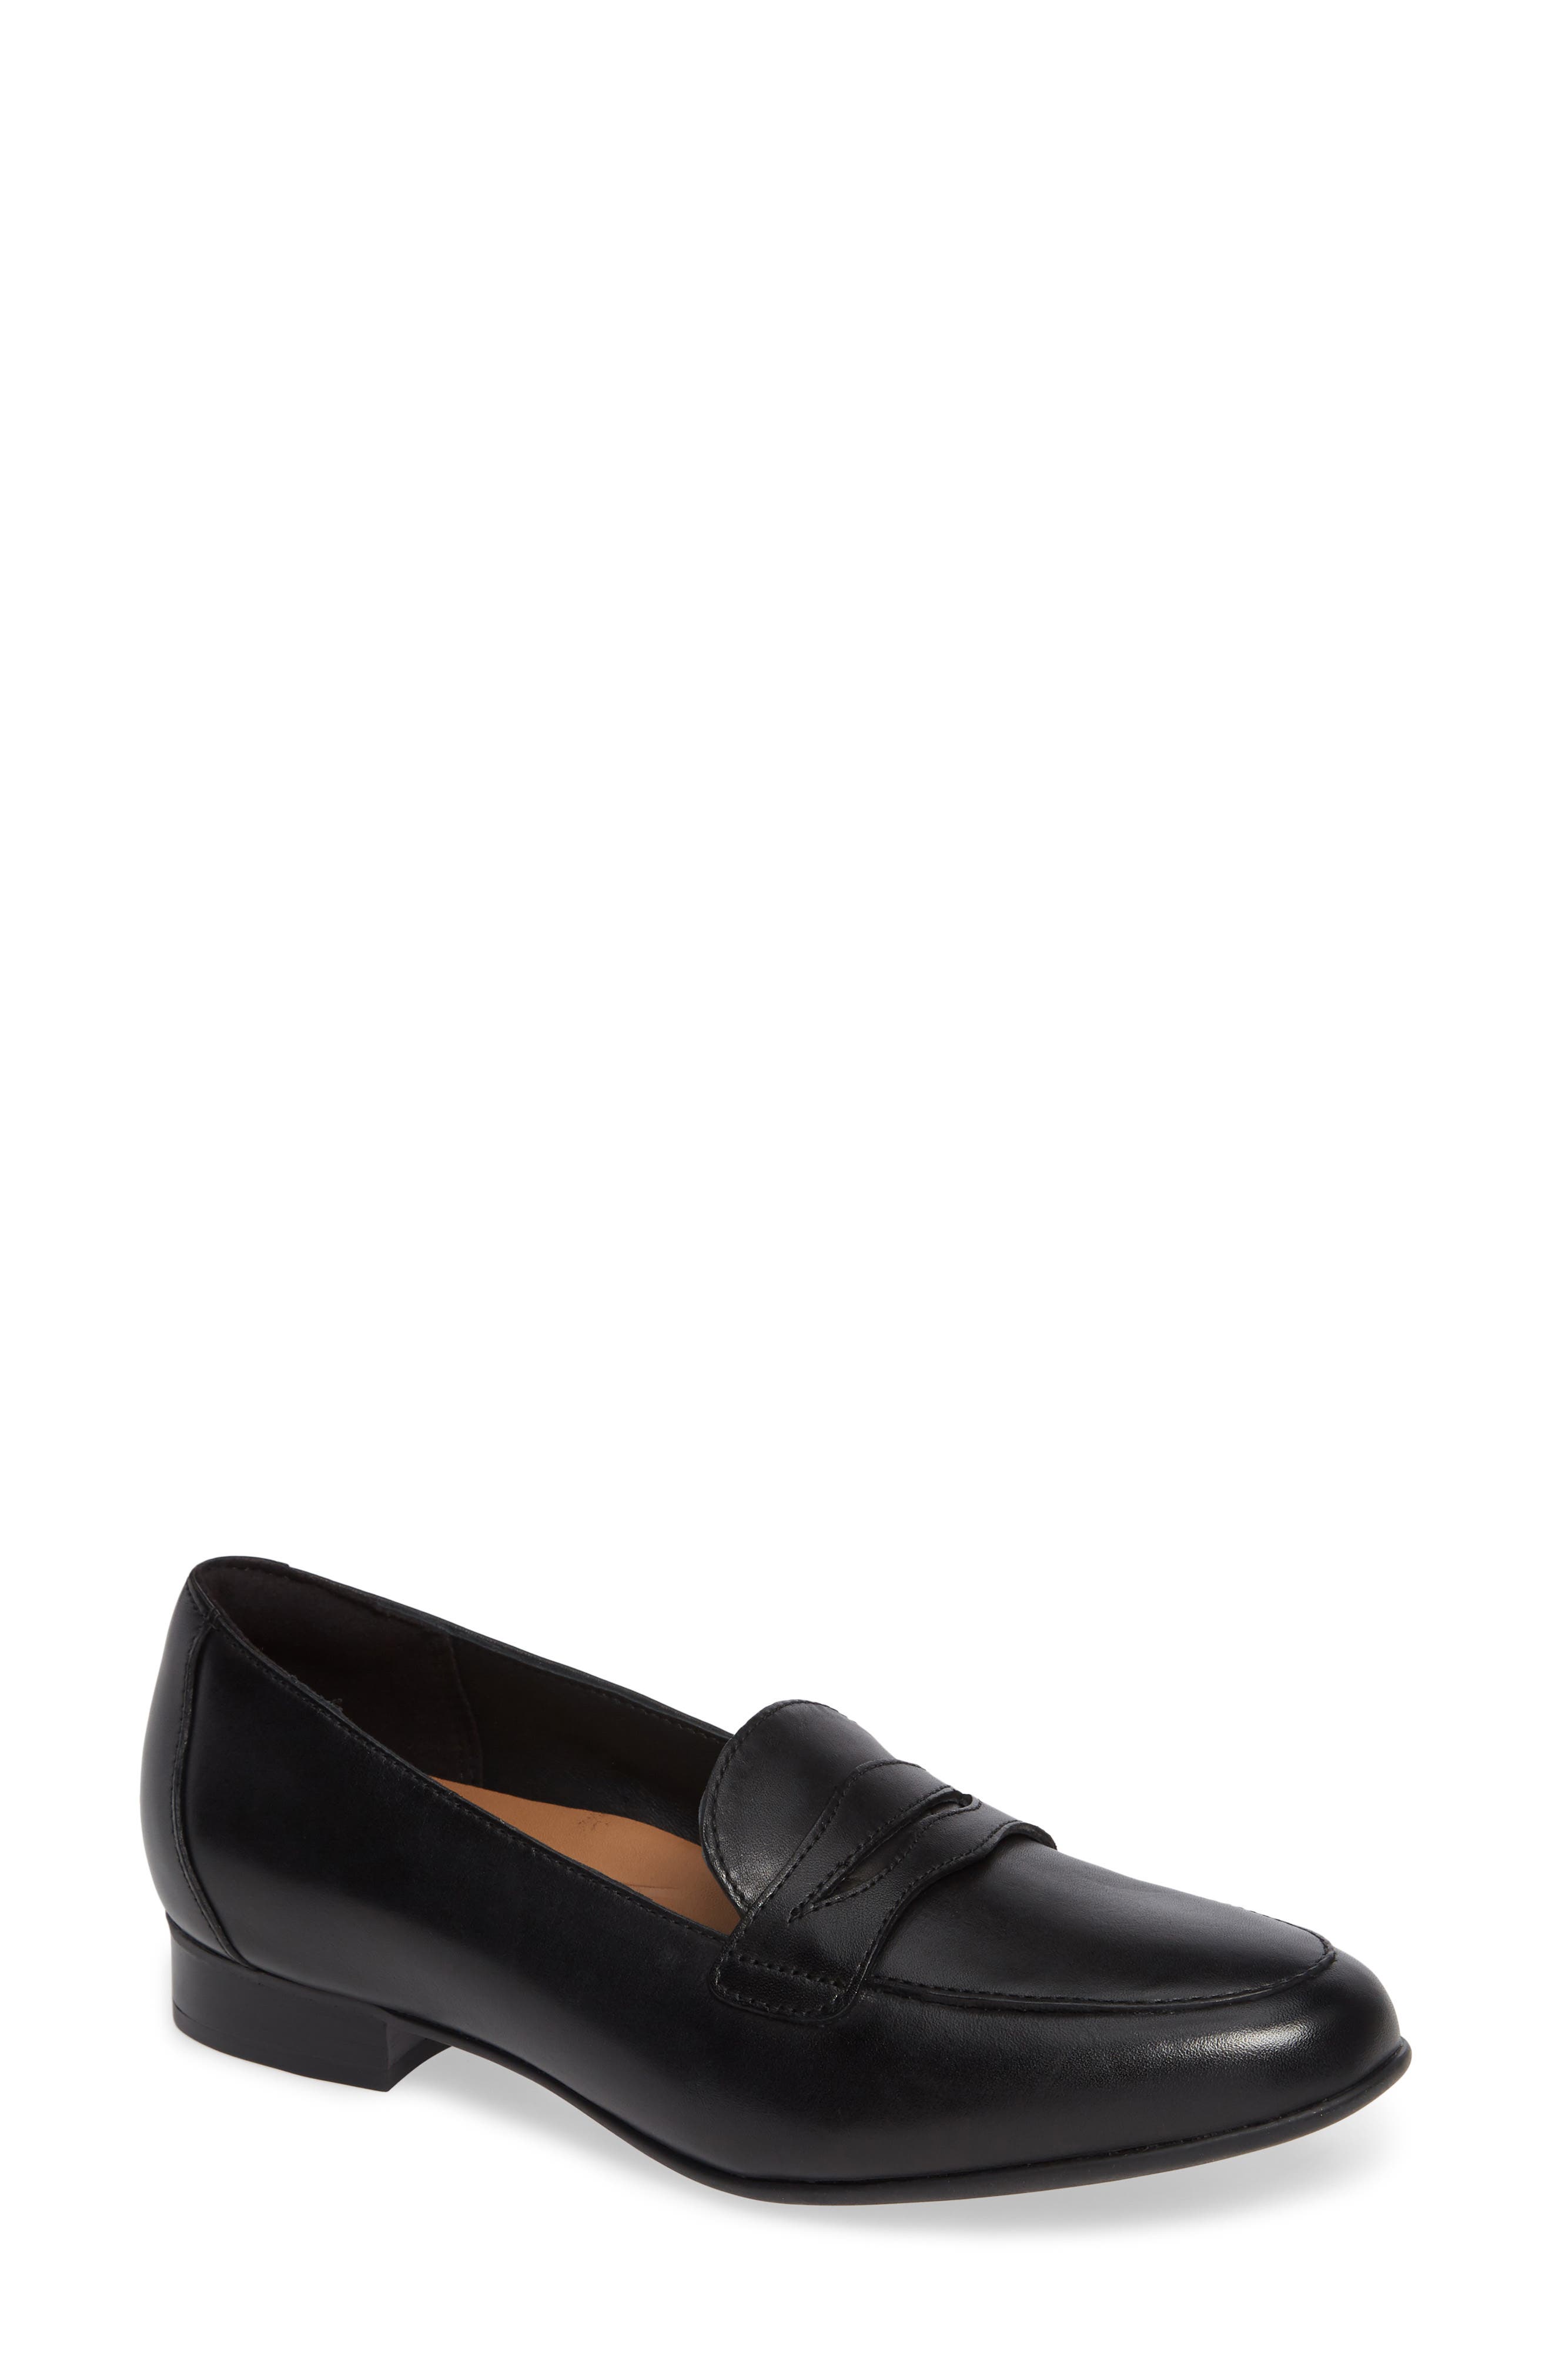 clarks loafer womens